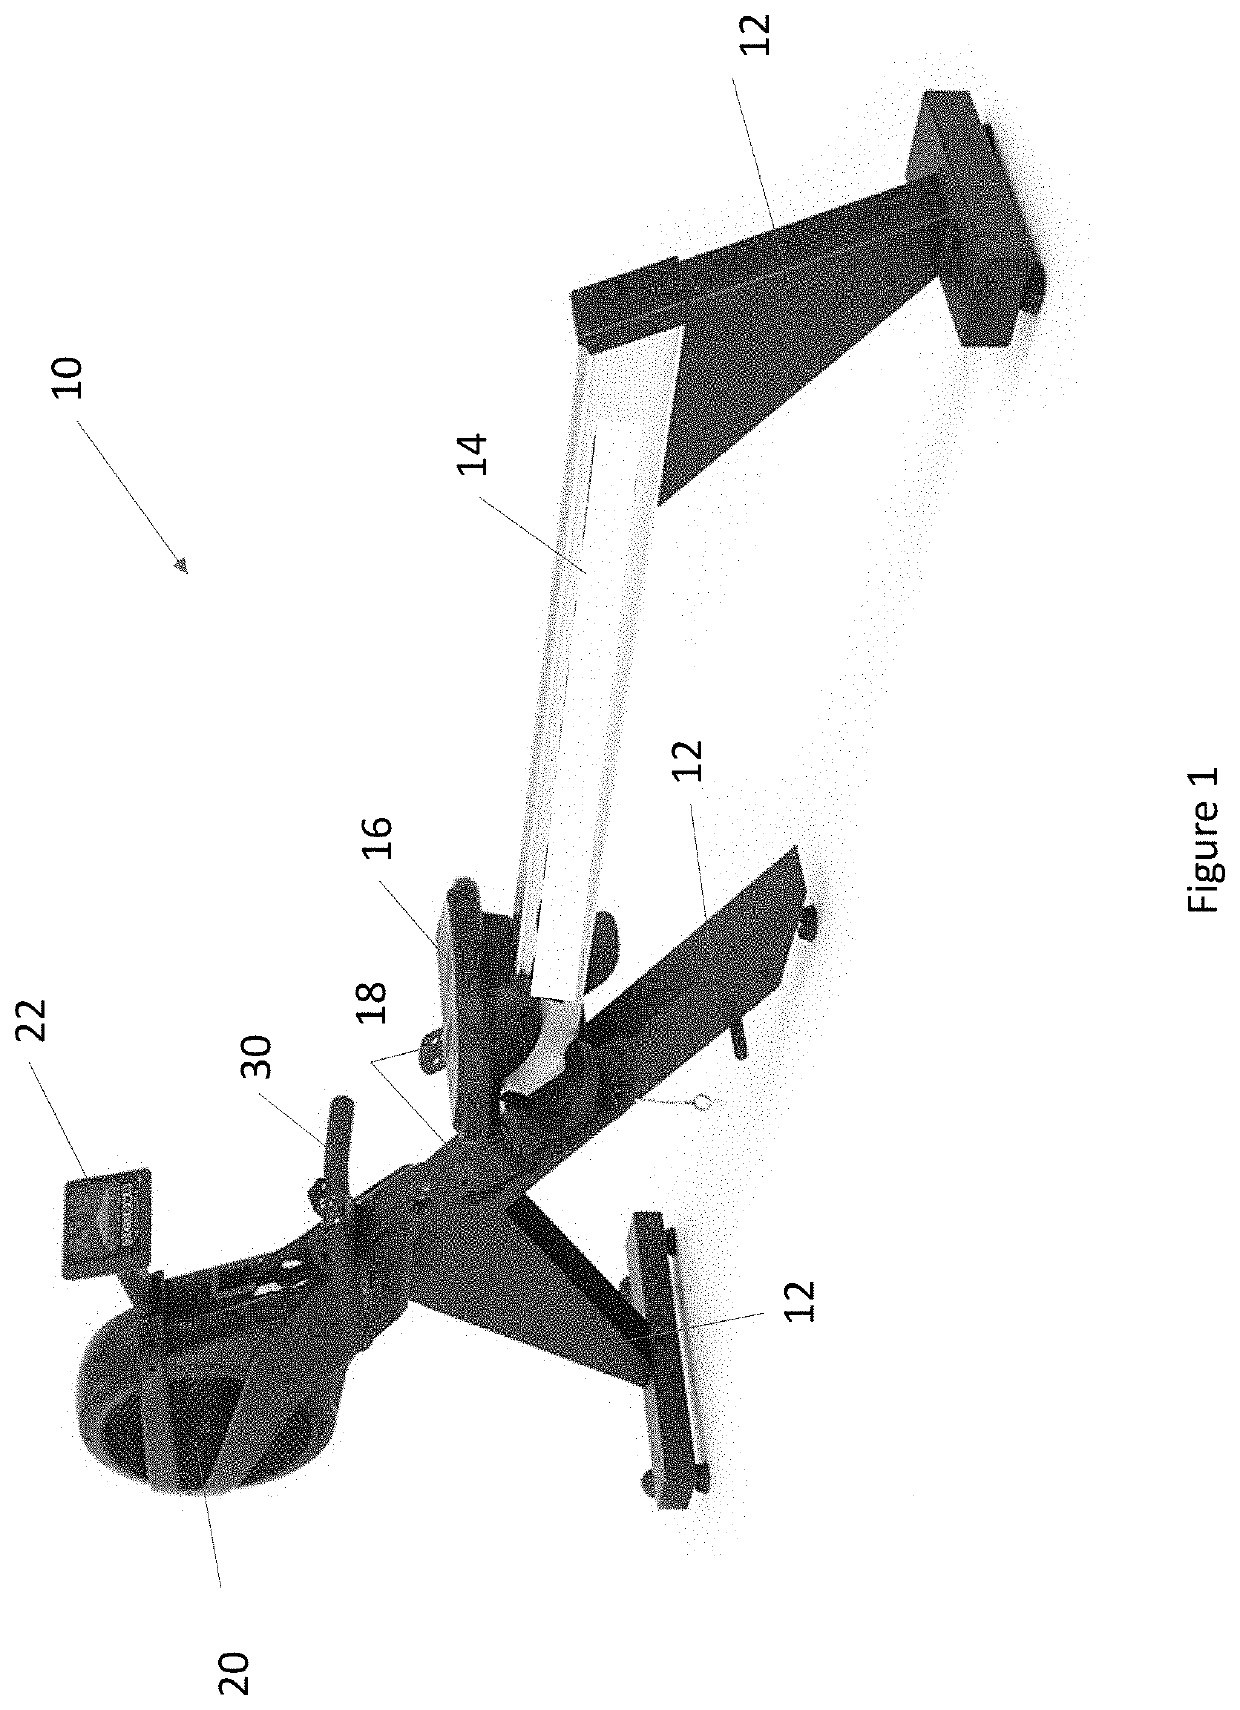 Rowing machine having a handle with a cursor control device for controlling a cursor at a graphical user interface